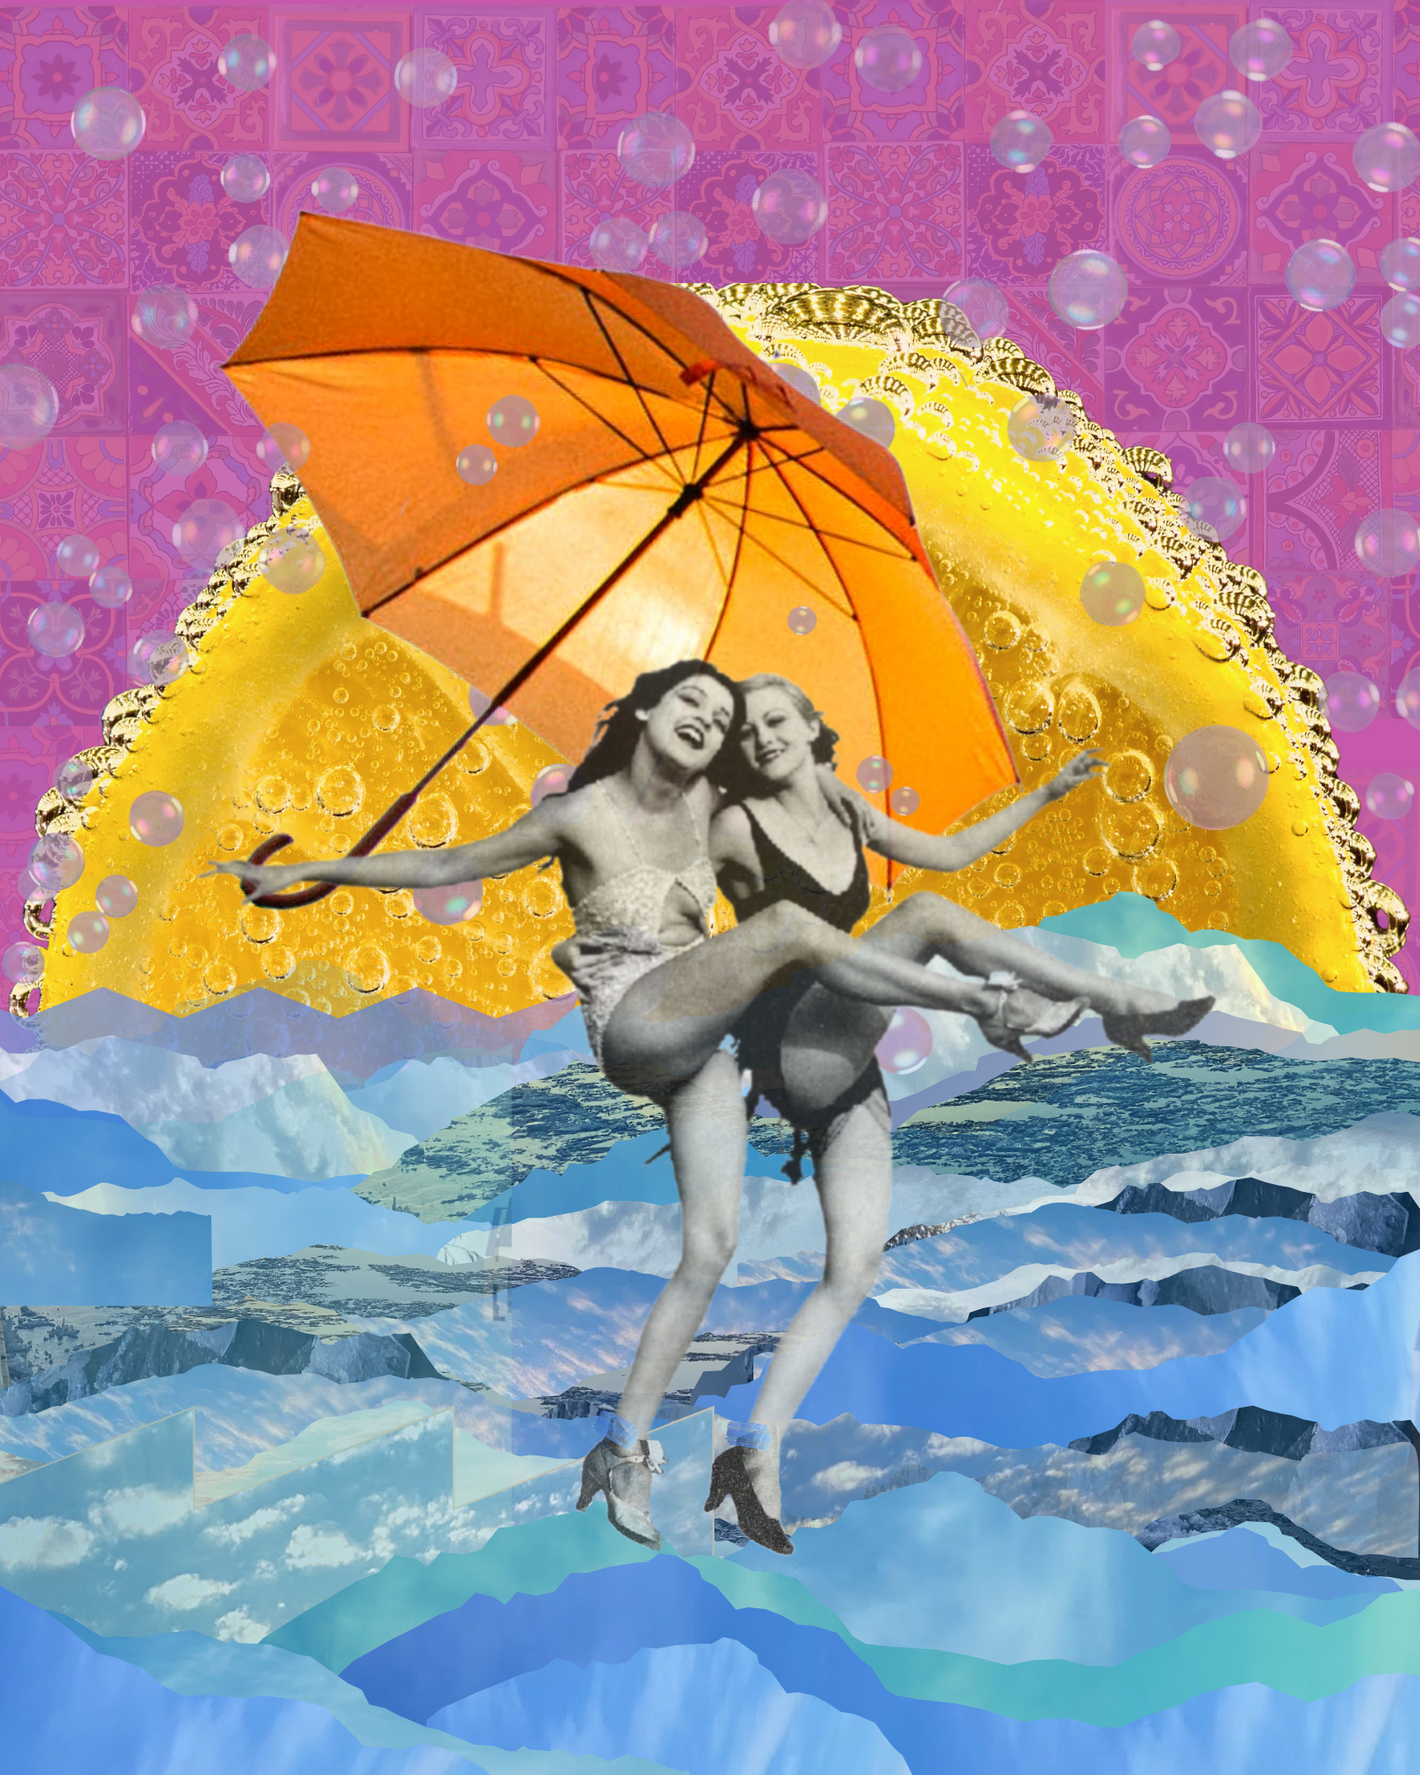 "Make Lemonade" digital collage of two women dancing at the beach under an umbrella with the lemon sun in the background. Made in Canva with some photos taken by artist Marvellous Darling.